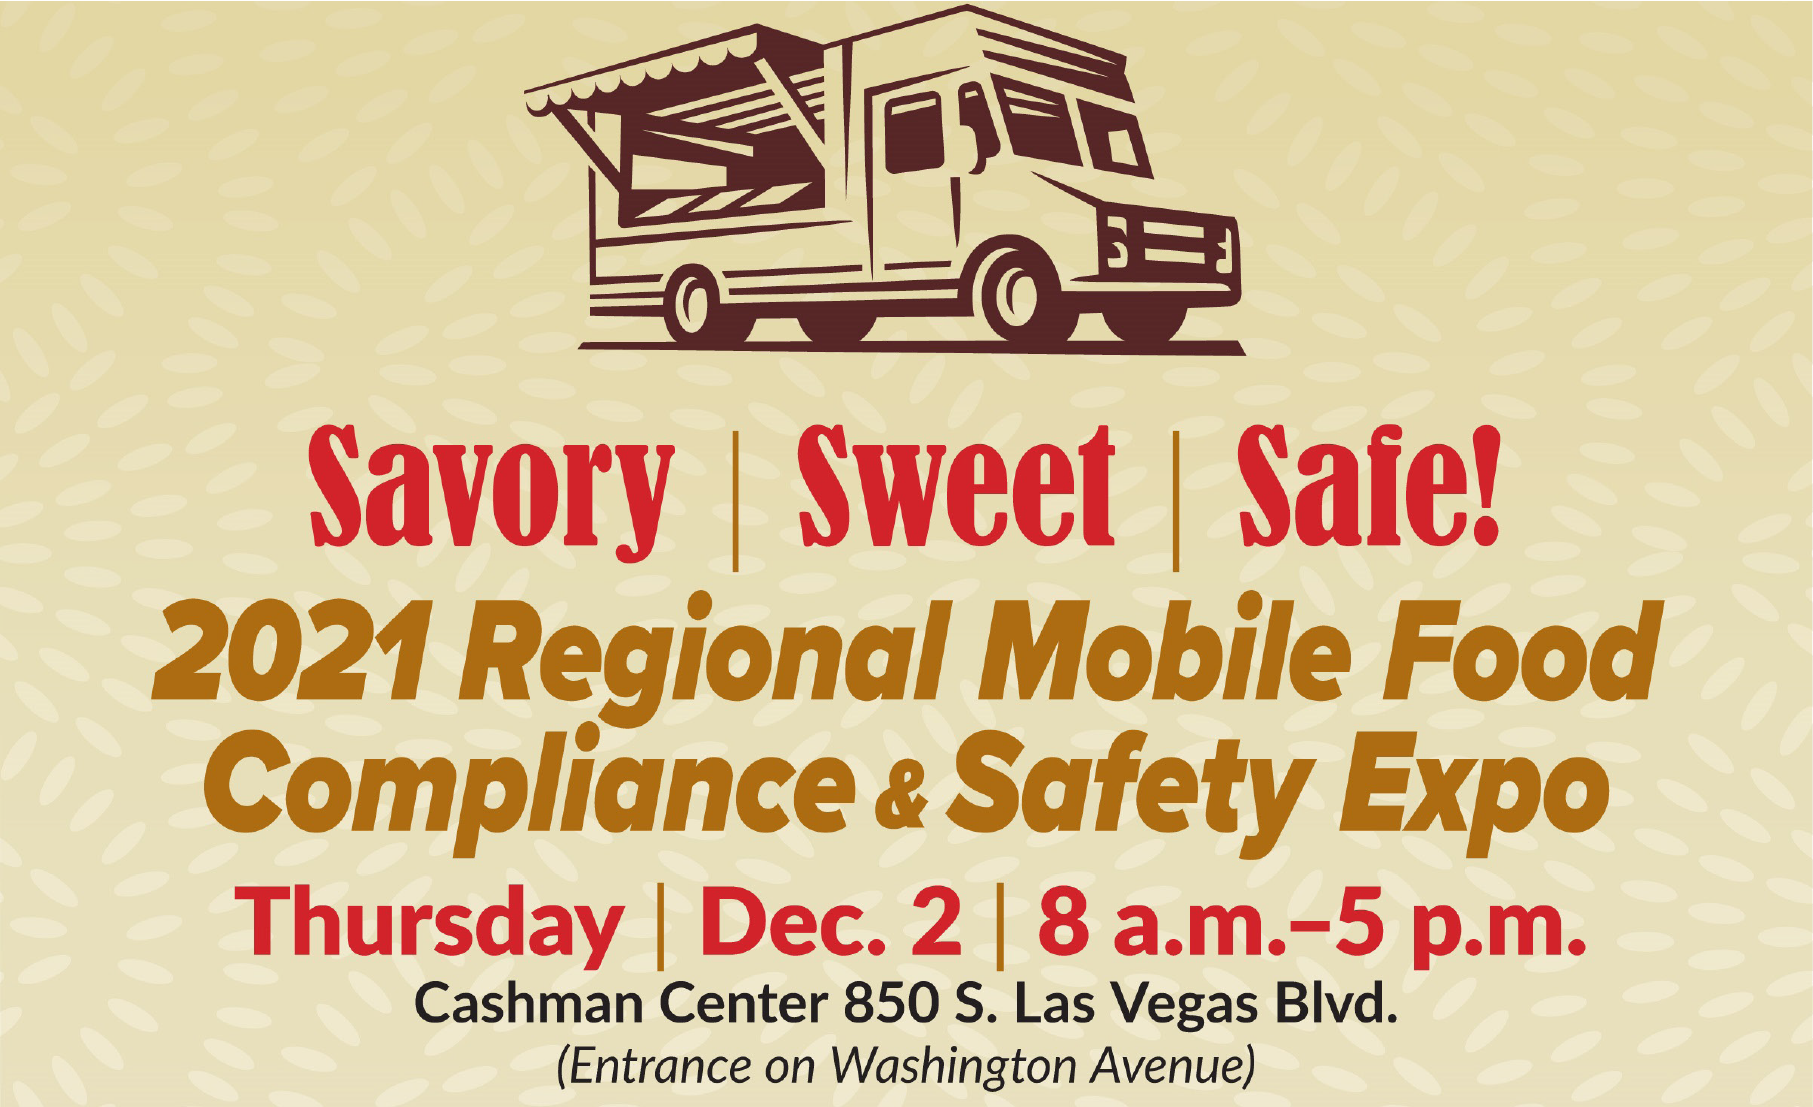 Mobile Food Compliance & Safety Expo